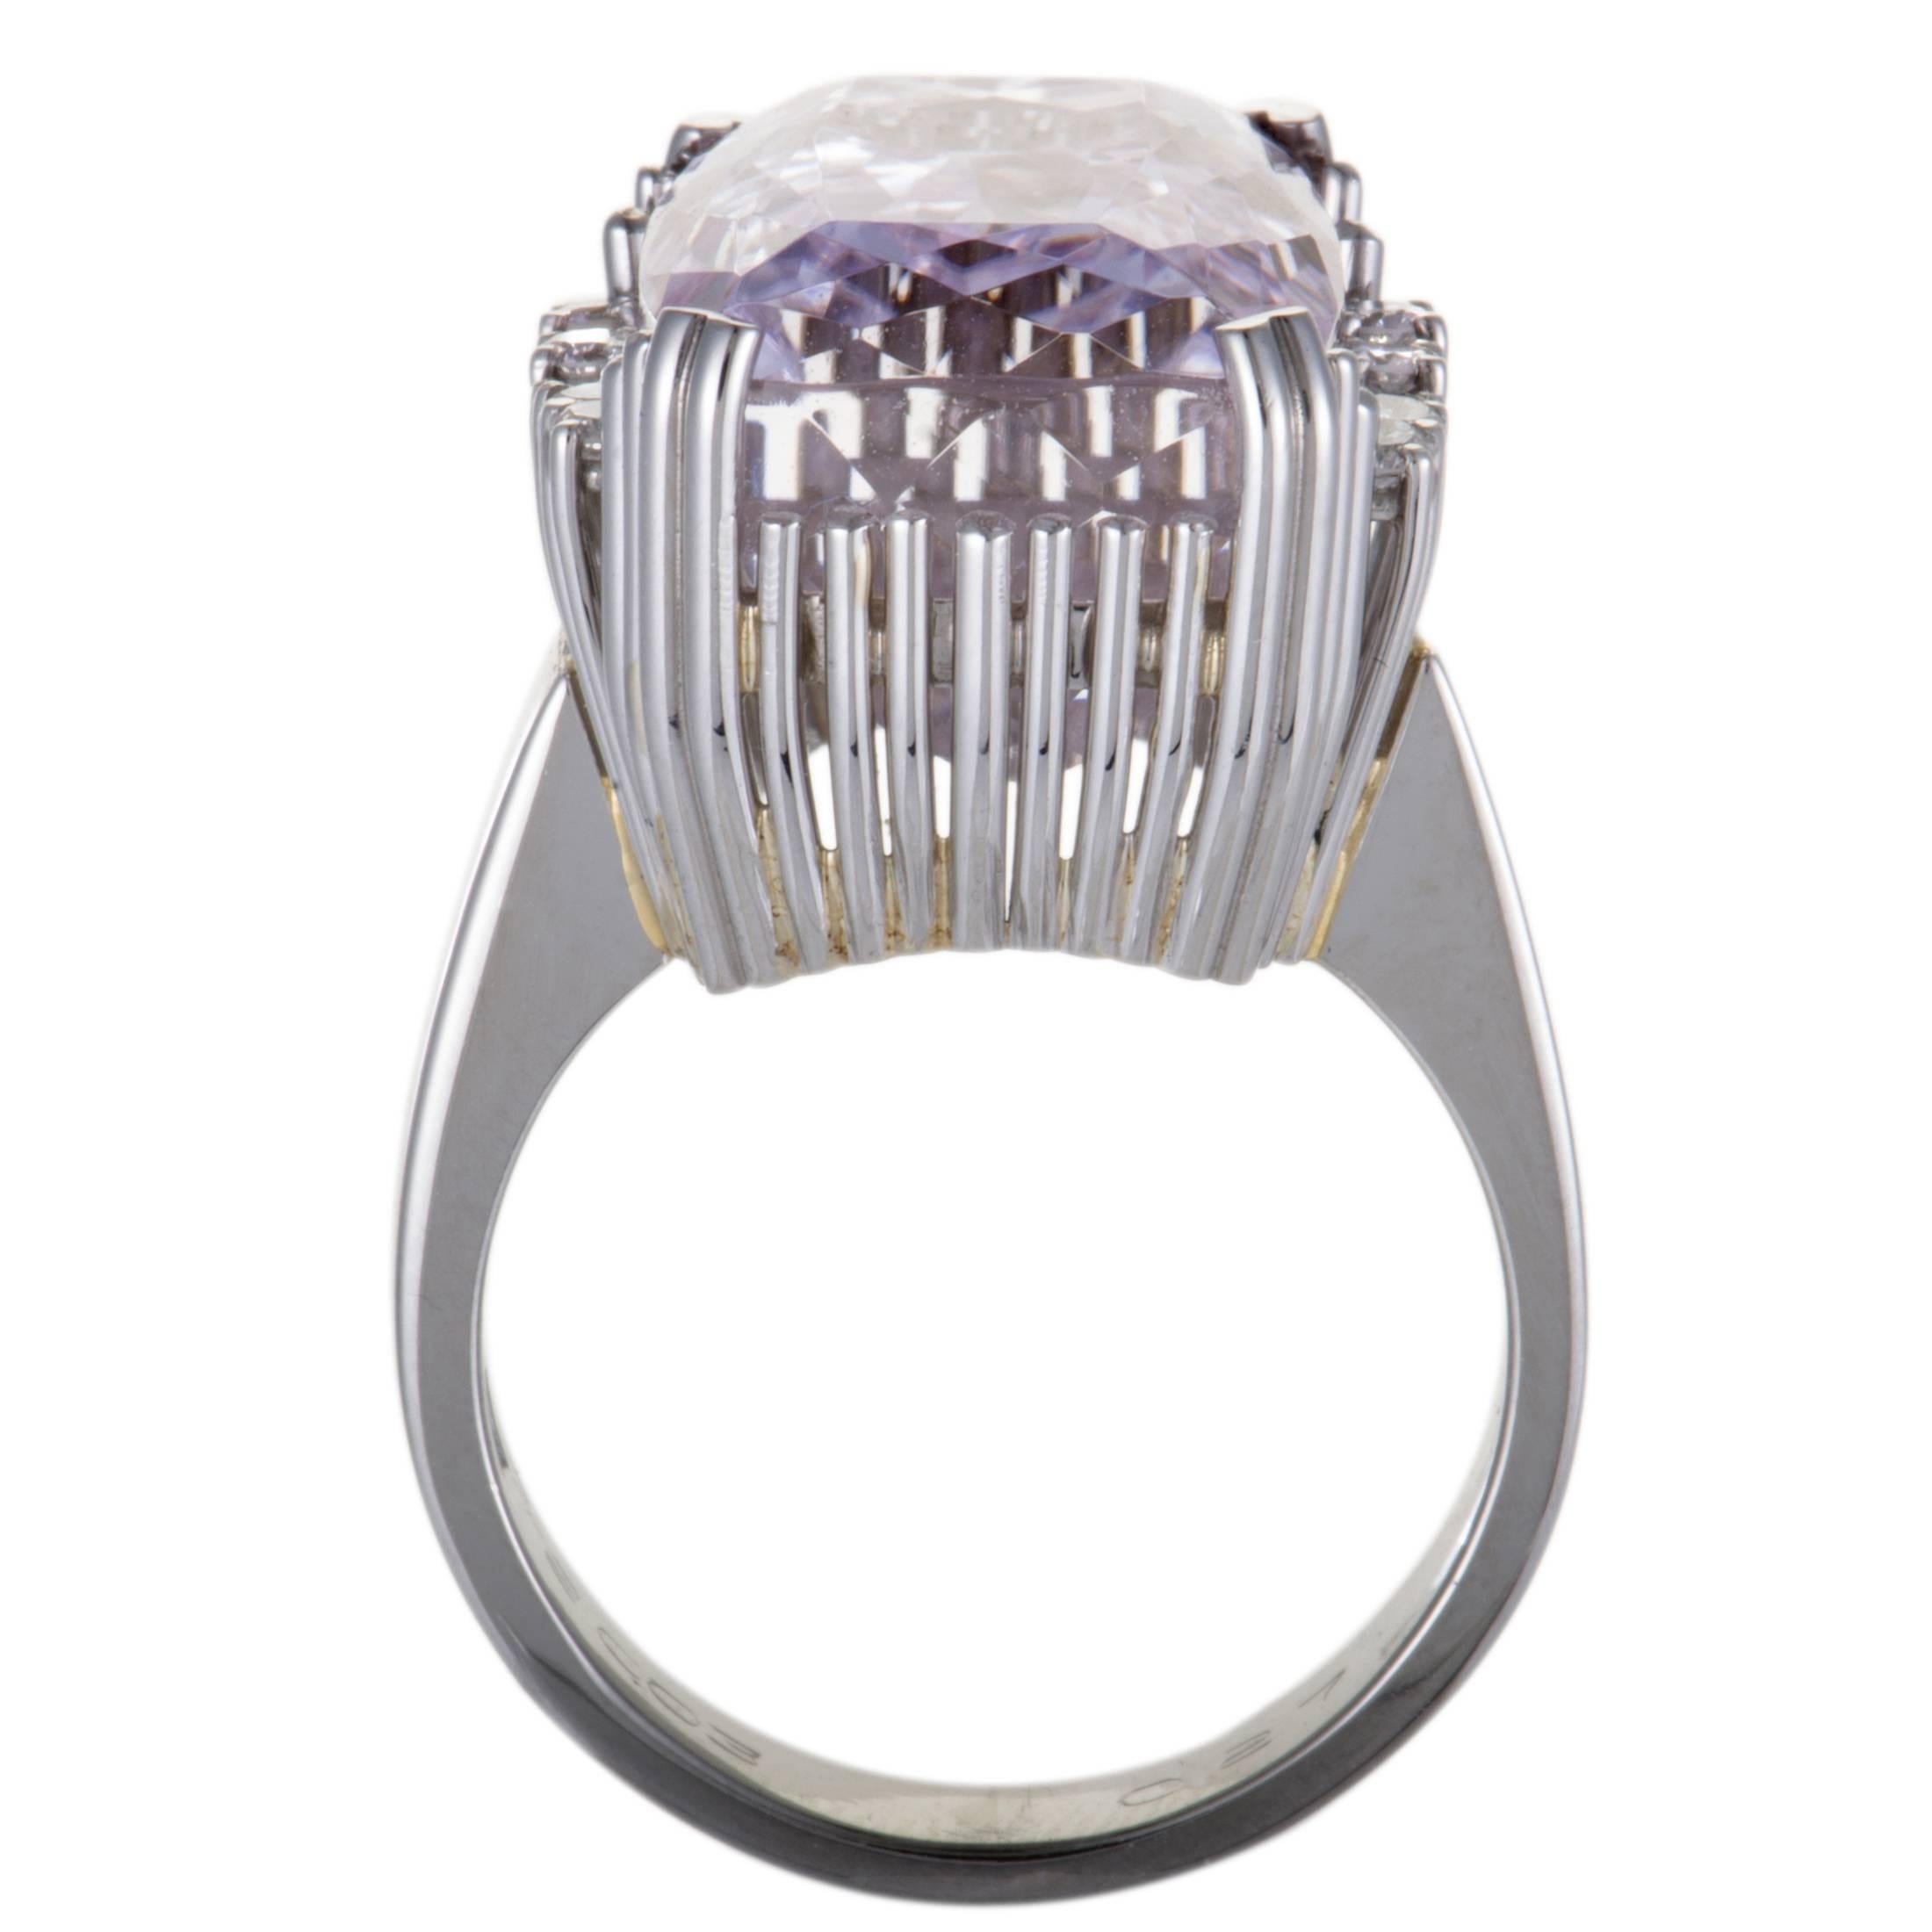 Wonderfully bright-toned and luxurious, this spellbinding ring boasts a strikingly offbeat design and enchanting décor. The ring is made of platinum and set with 0.24 carats of sparkling diamond stones that gorgeously accentuate the sublime kunzite